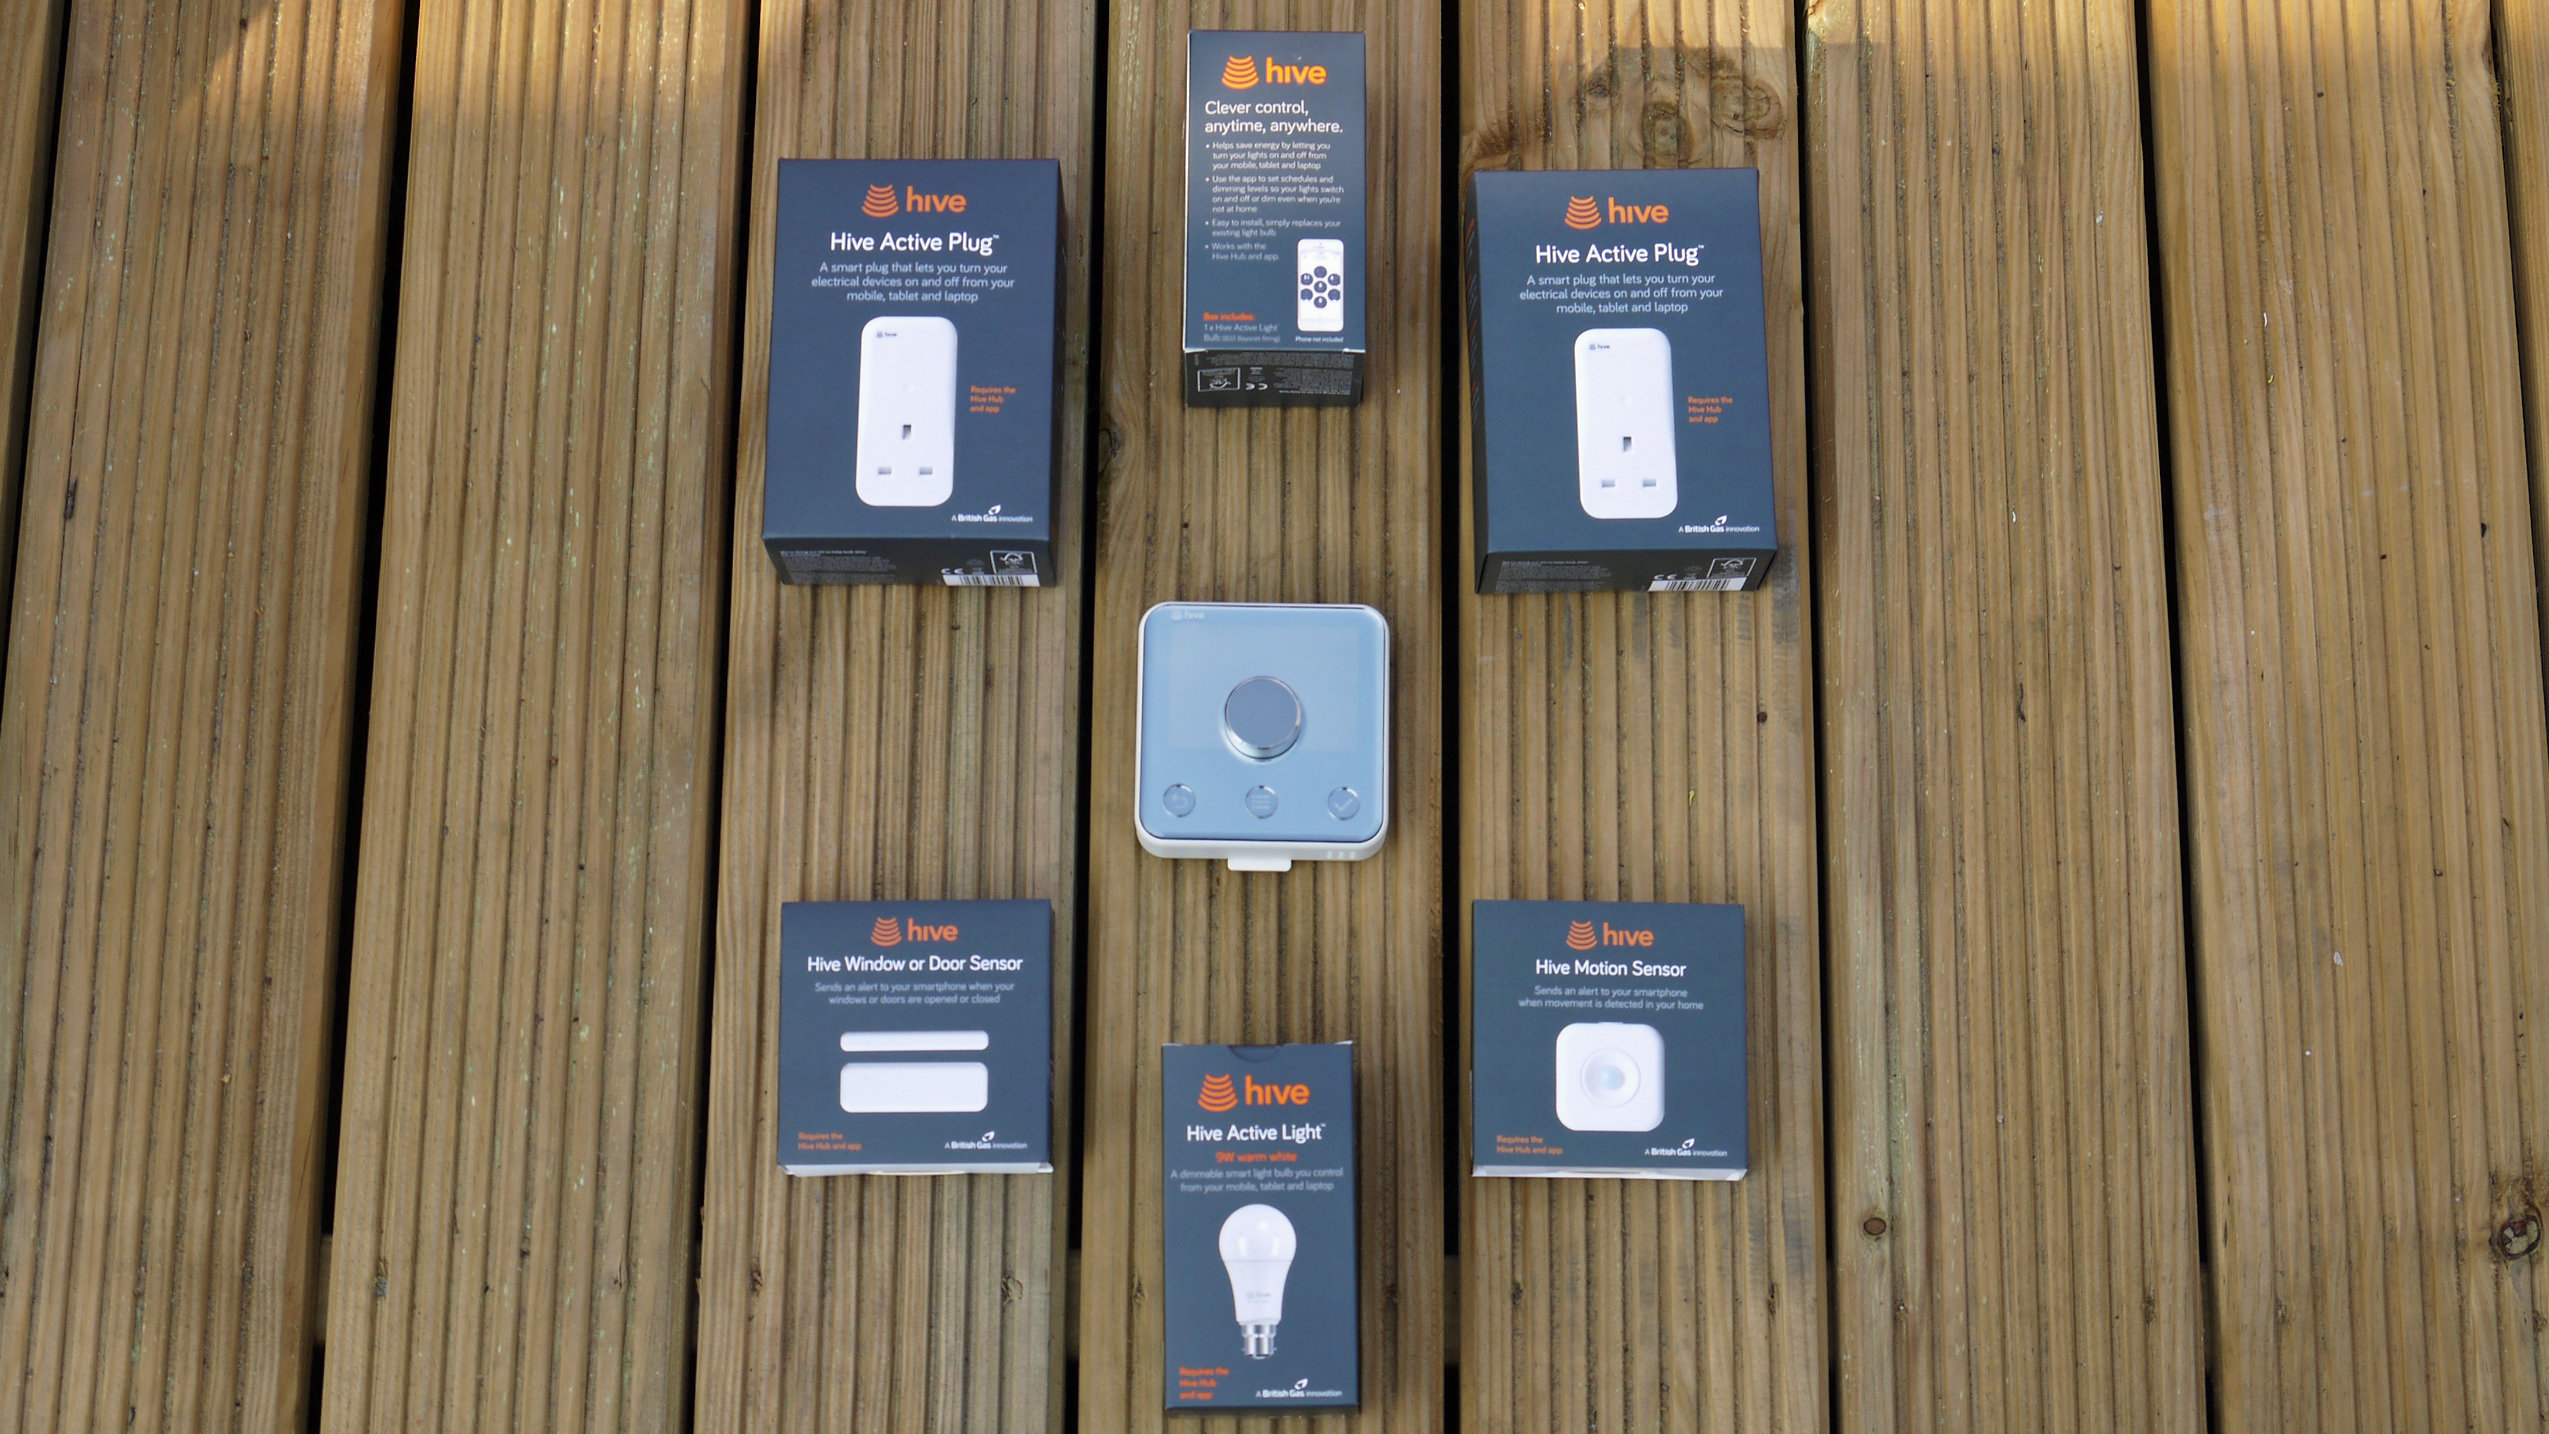 The Hive thermostat surrounded by several smart home gadgets including smart lights and plugs